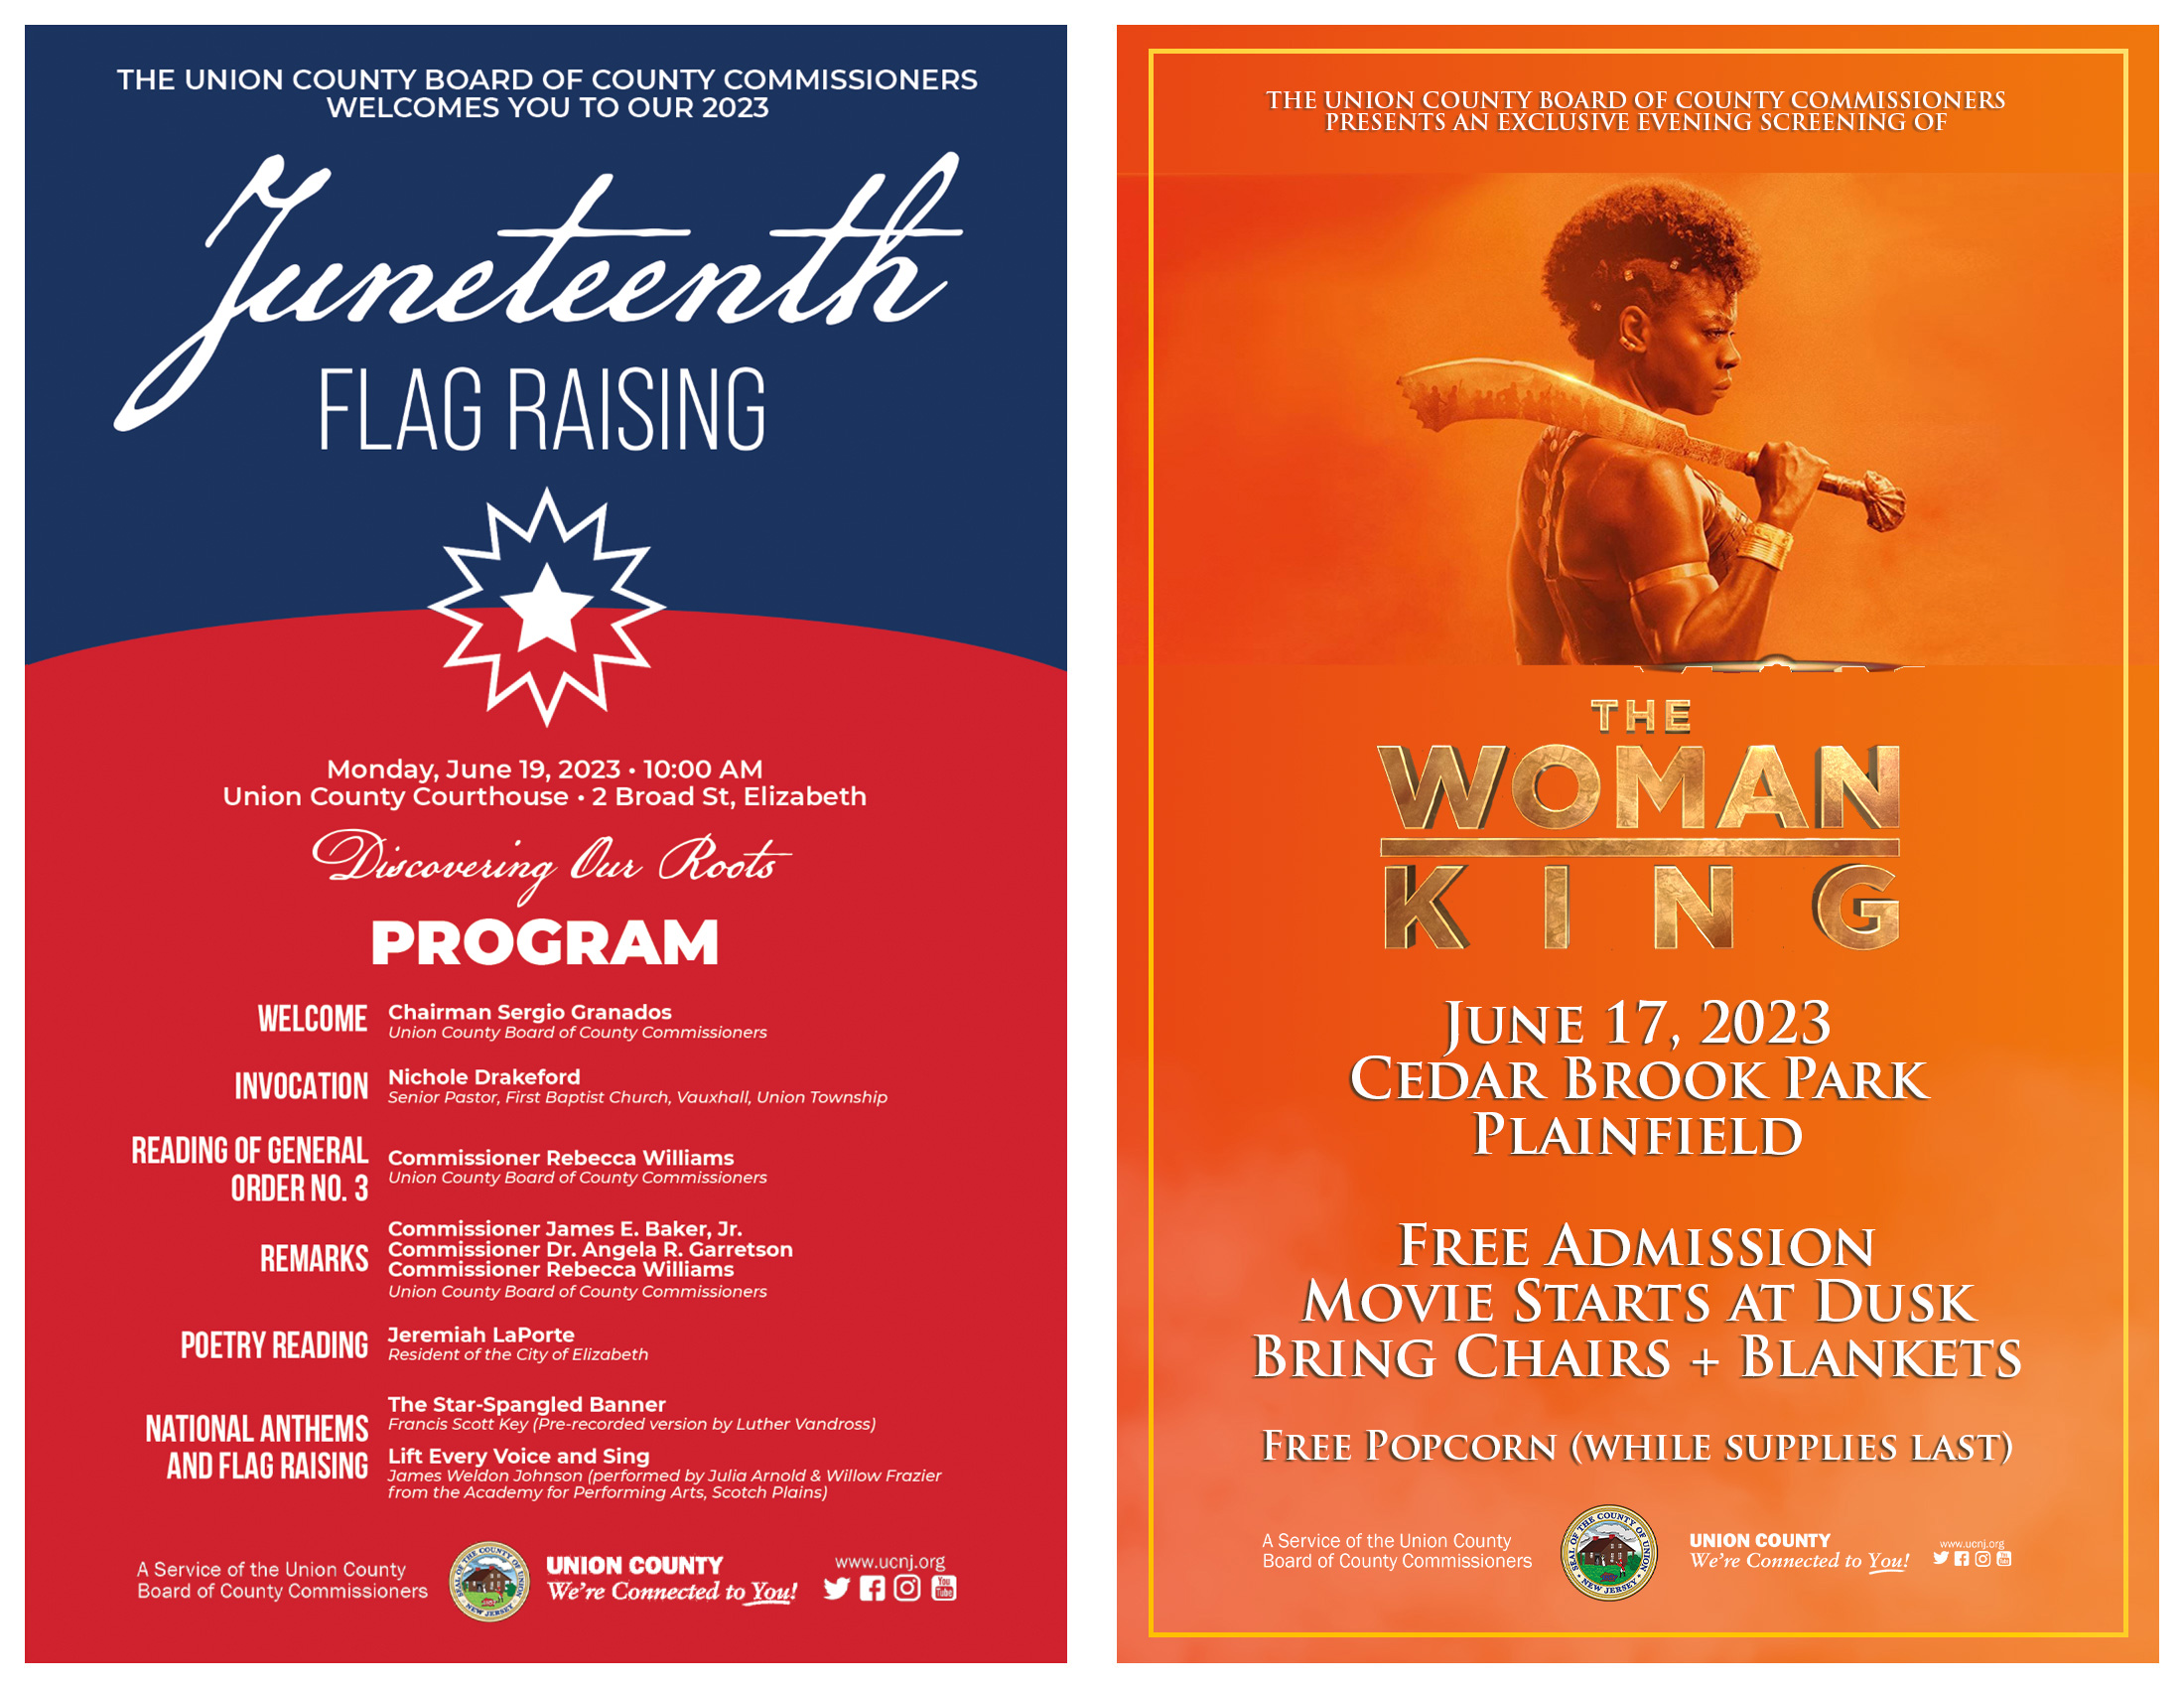 Union County Celebrates Juneteenth with Flag Raising & Special Movie Presentation